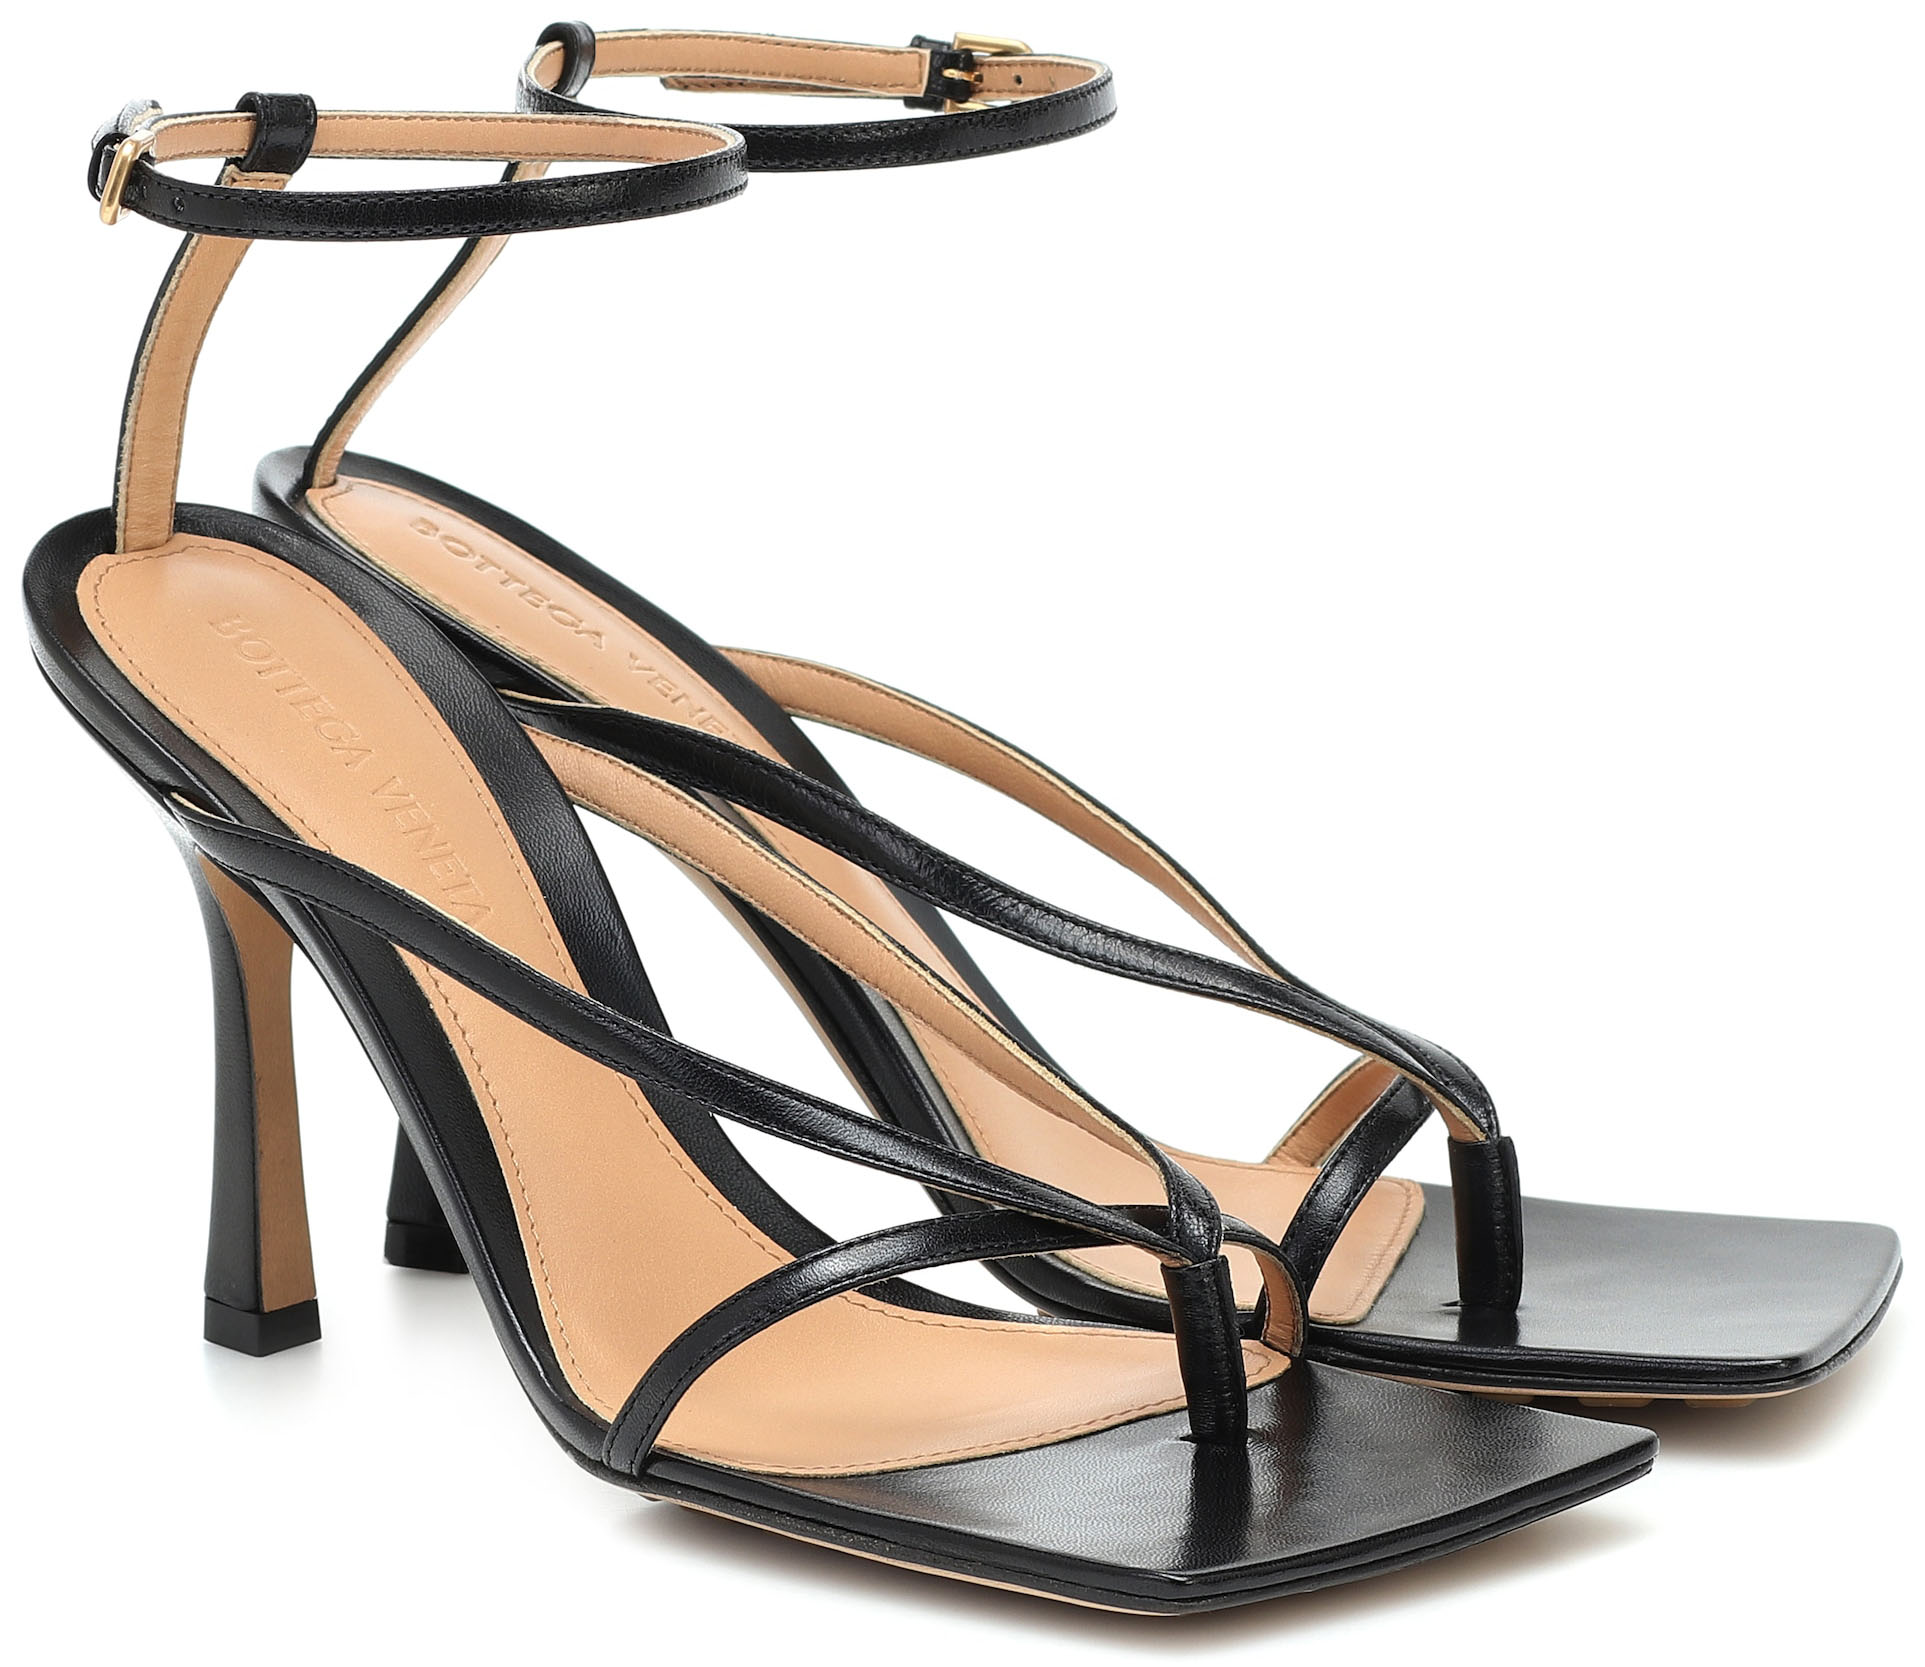 These sandals are molded to a modern square-toe silhouette and set upon sculpted heels